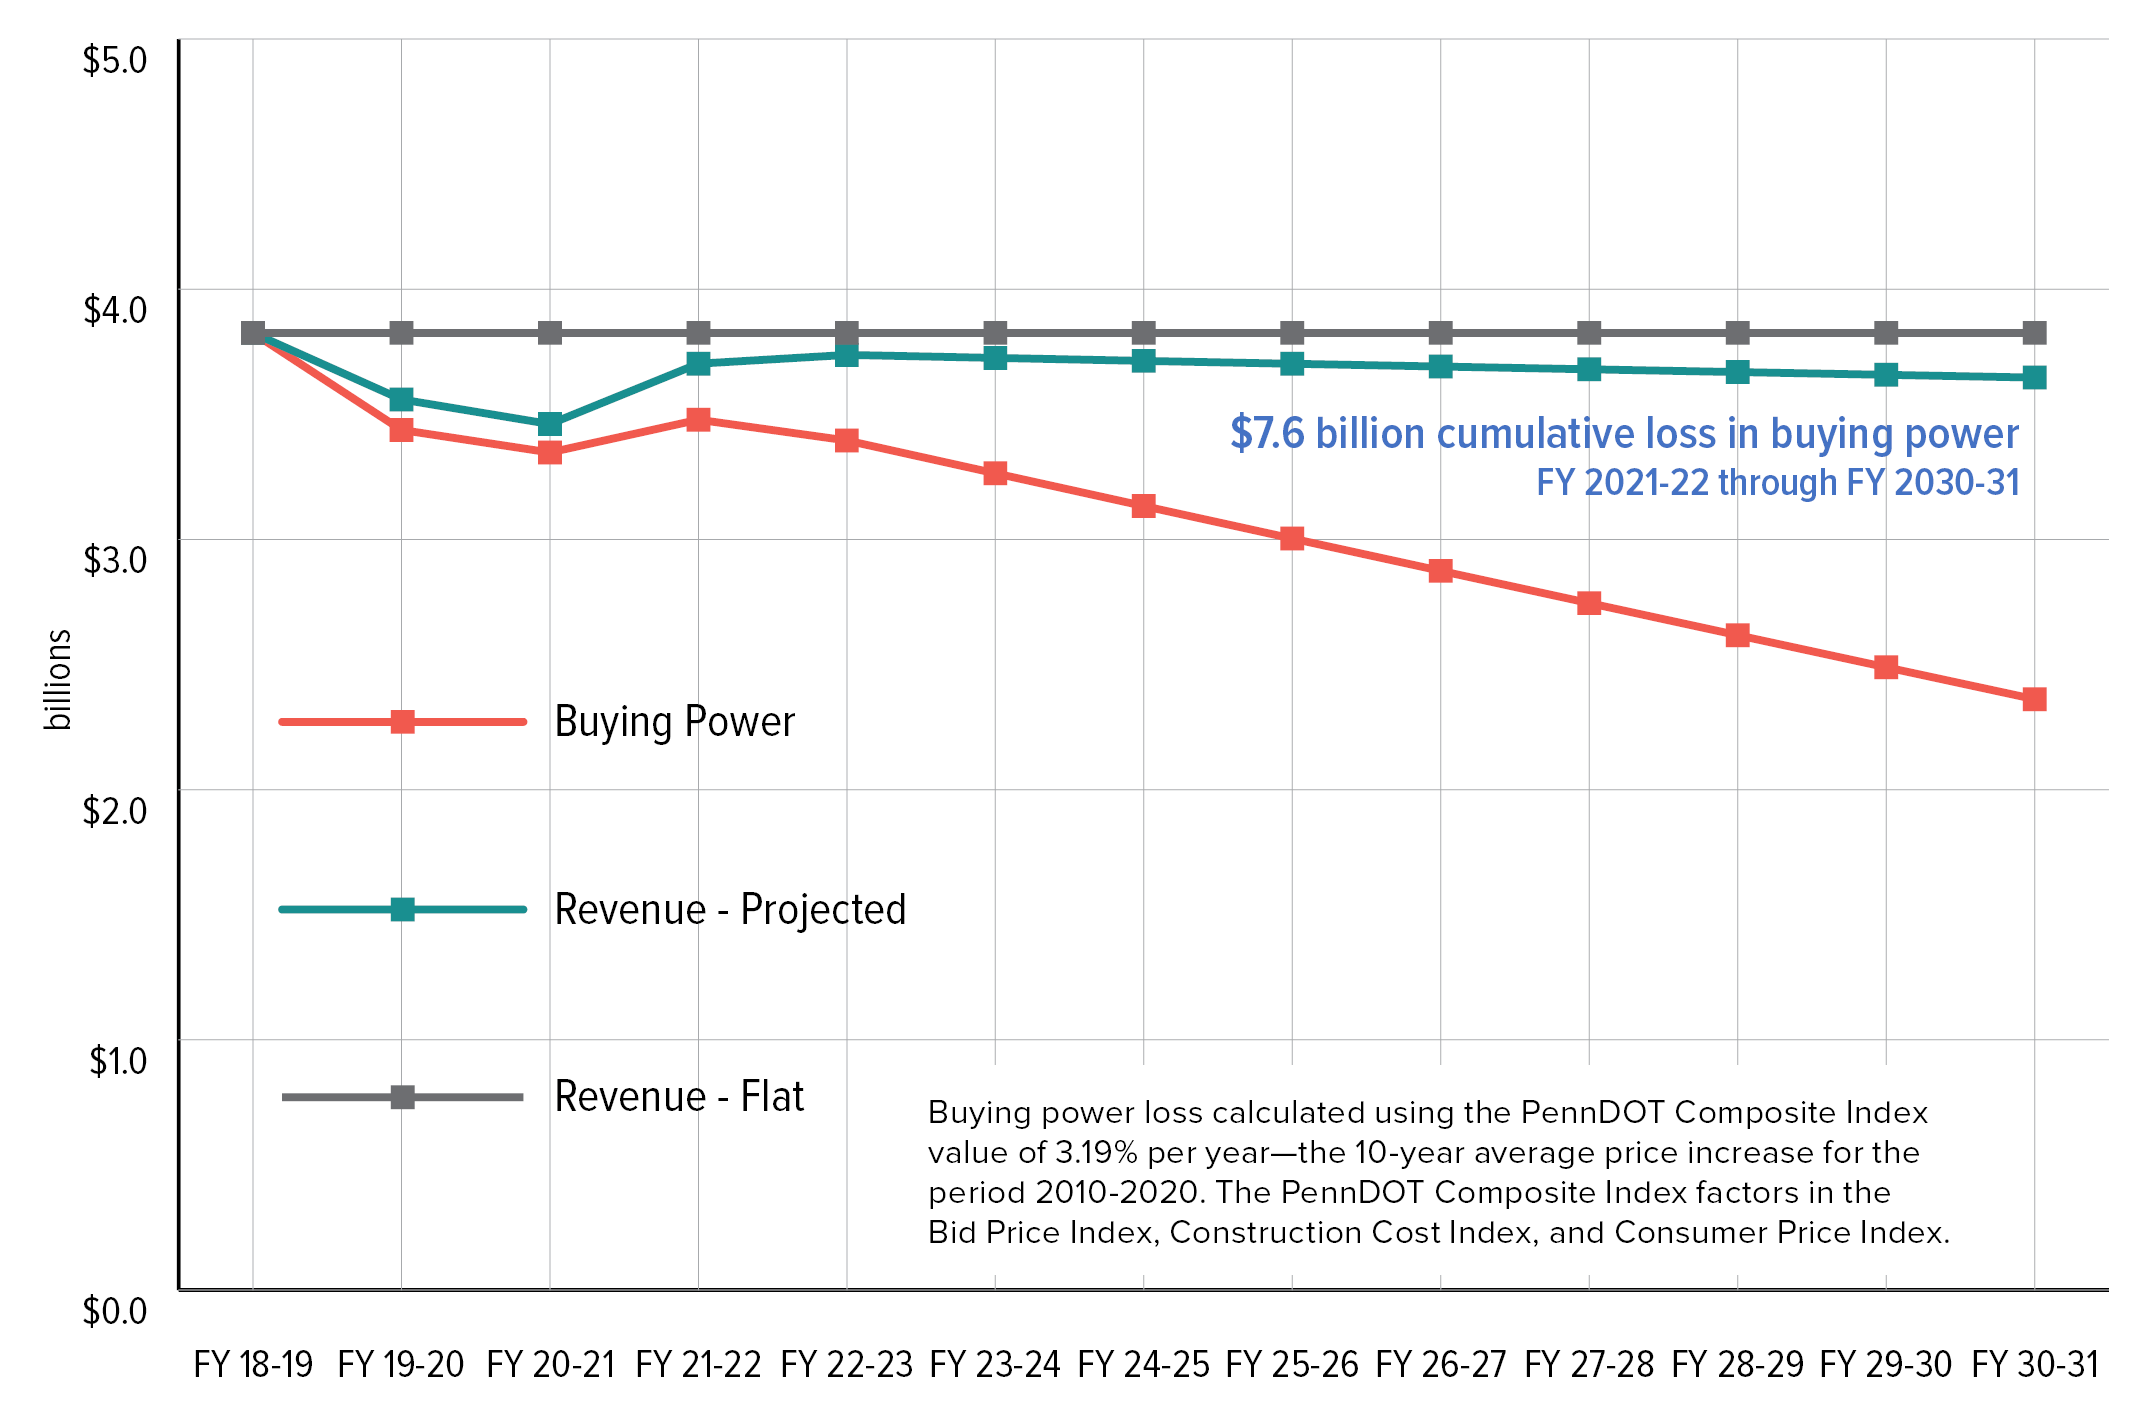 Line chart showing three lines yearly starting with Fiscal Year 2018-19 and ending with FY 2030-31. The line for budgeted revenue is flat at $3.83 billion. The line for project revenue starts at $3.83 billion, decreased over two years to $3.46 billion, increases to a high of $3.74 billion in FY 22-23, then decreases again to $3.65 billion in FY 30-31. The line for buying power starts at $3.83 billion, decreases over two years to $3.35 billion, increases to $3.48 billion the following year, then drastically declines each year to a low of $2.36 billion in FY 30-31.